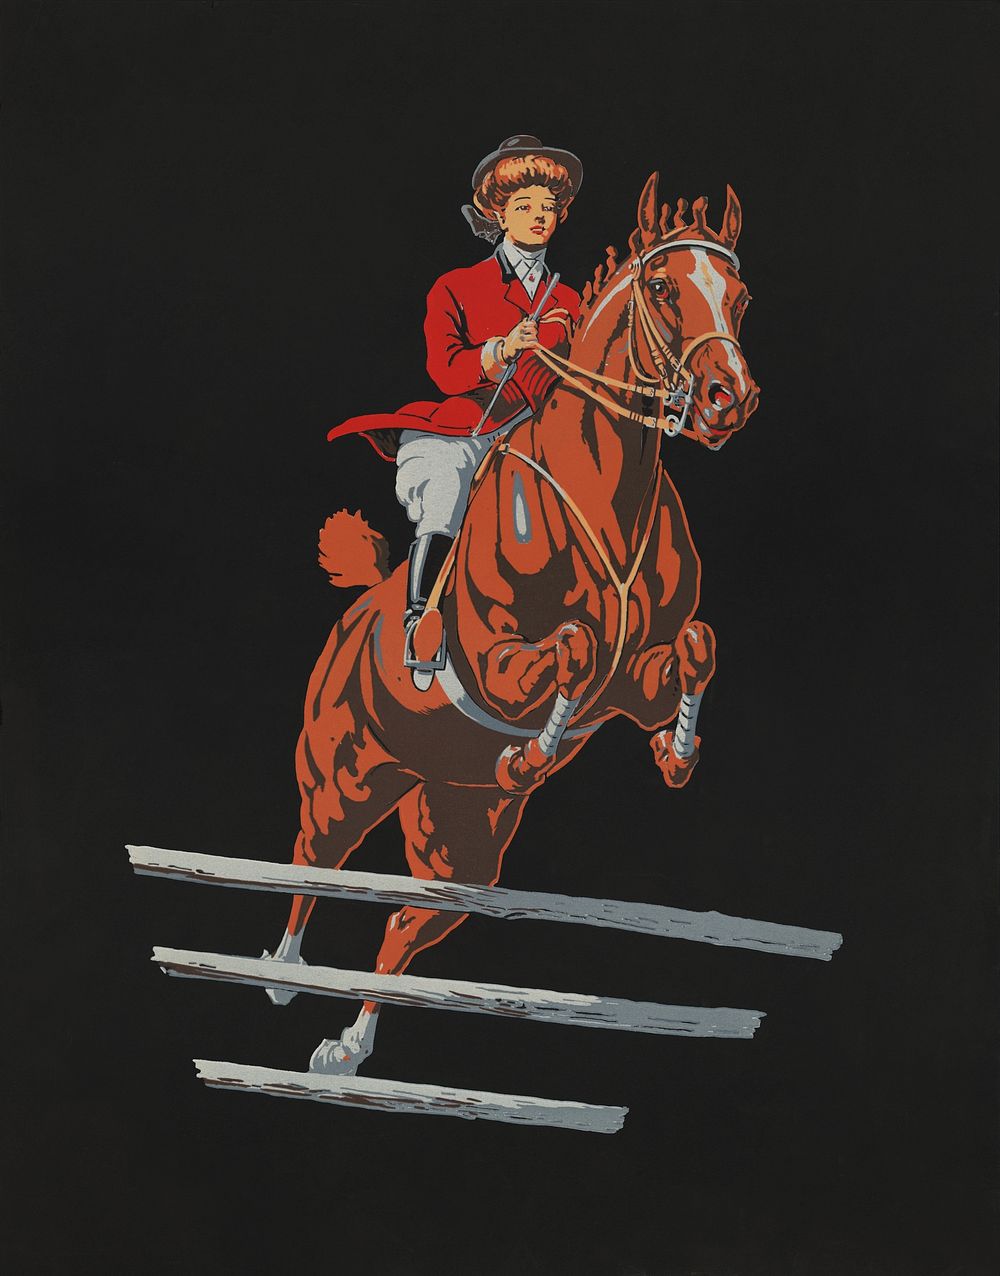 Taking a flyer (1909), vintage female horse rider illustration. Original public domain image from the Library of Congress.…